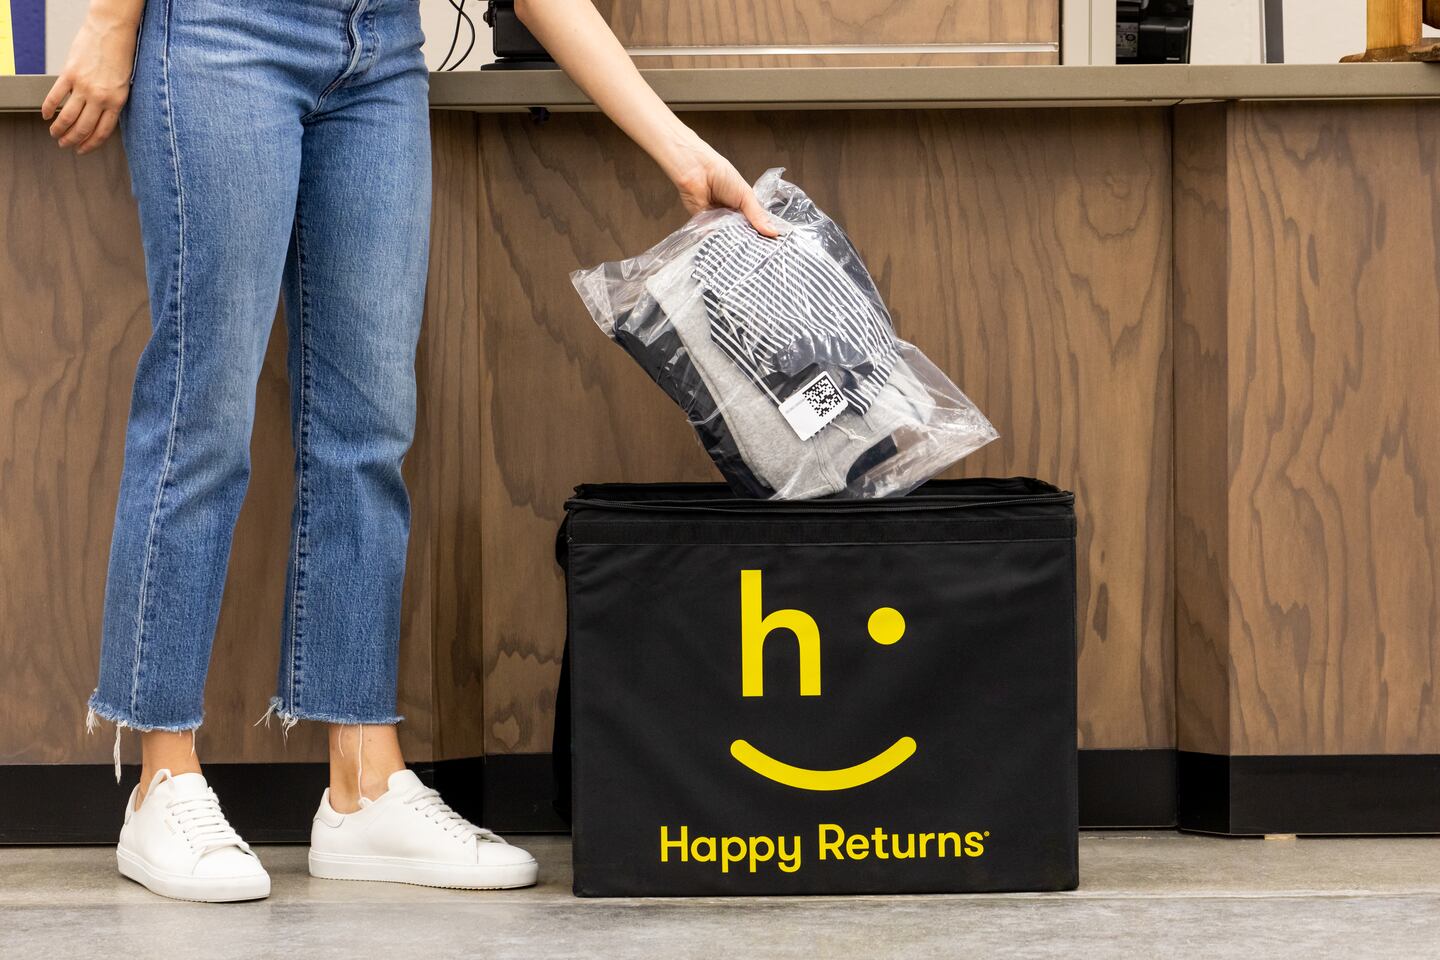 Happy Returns give shoppers an in-person drop off location for online purchases.